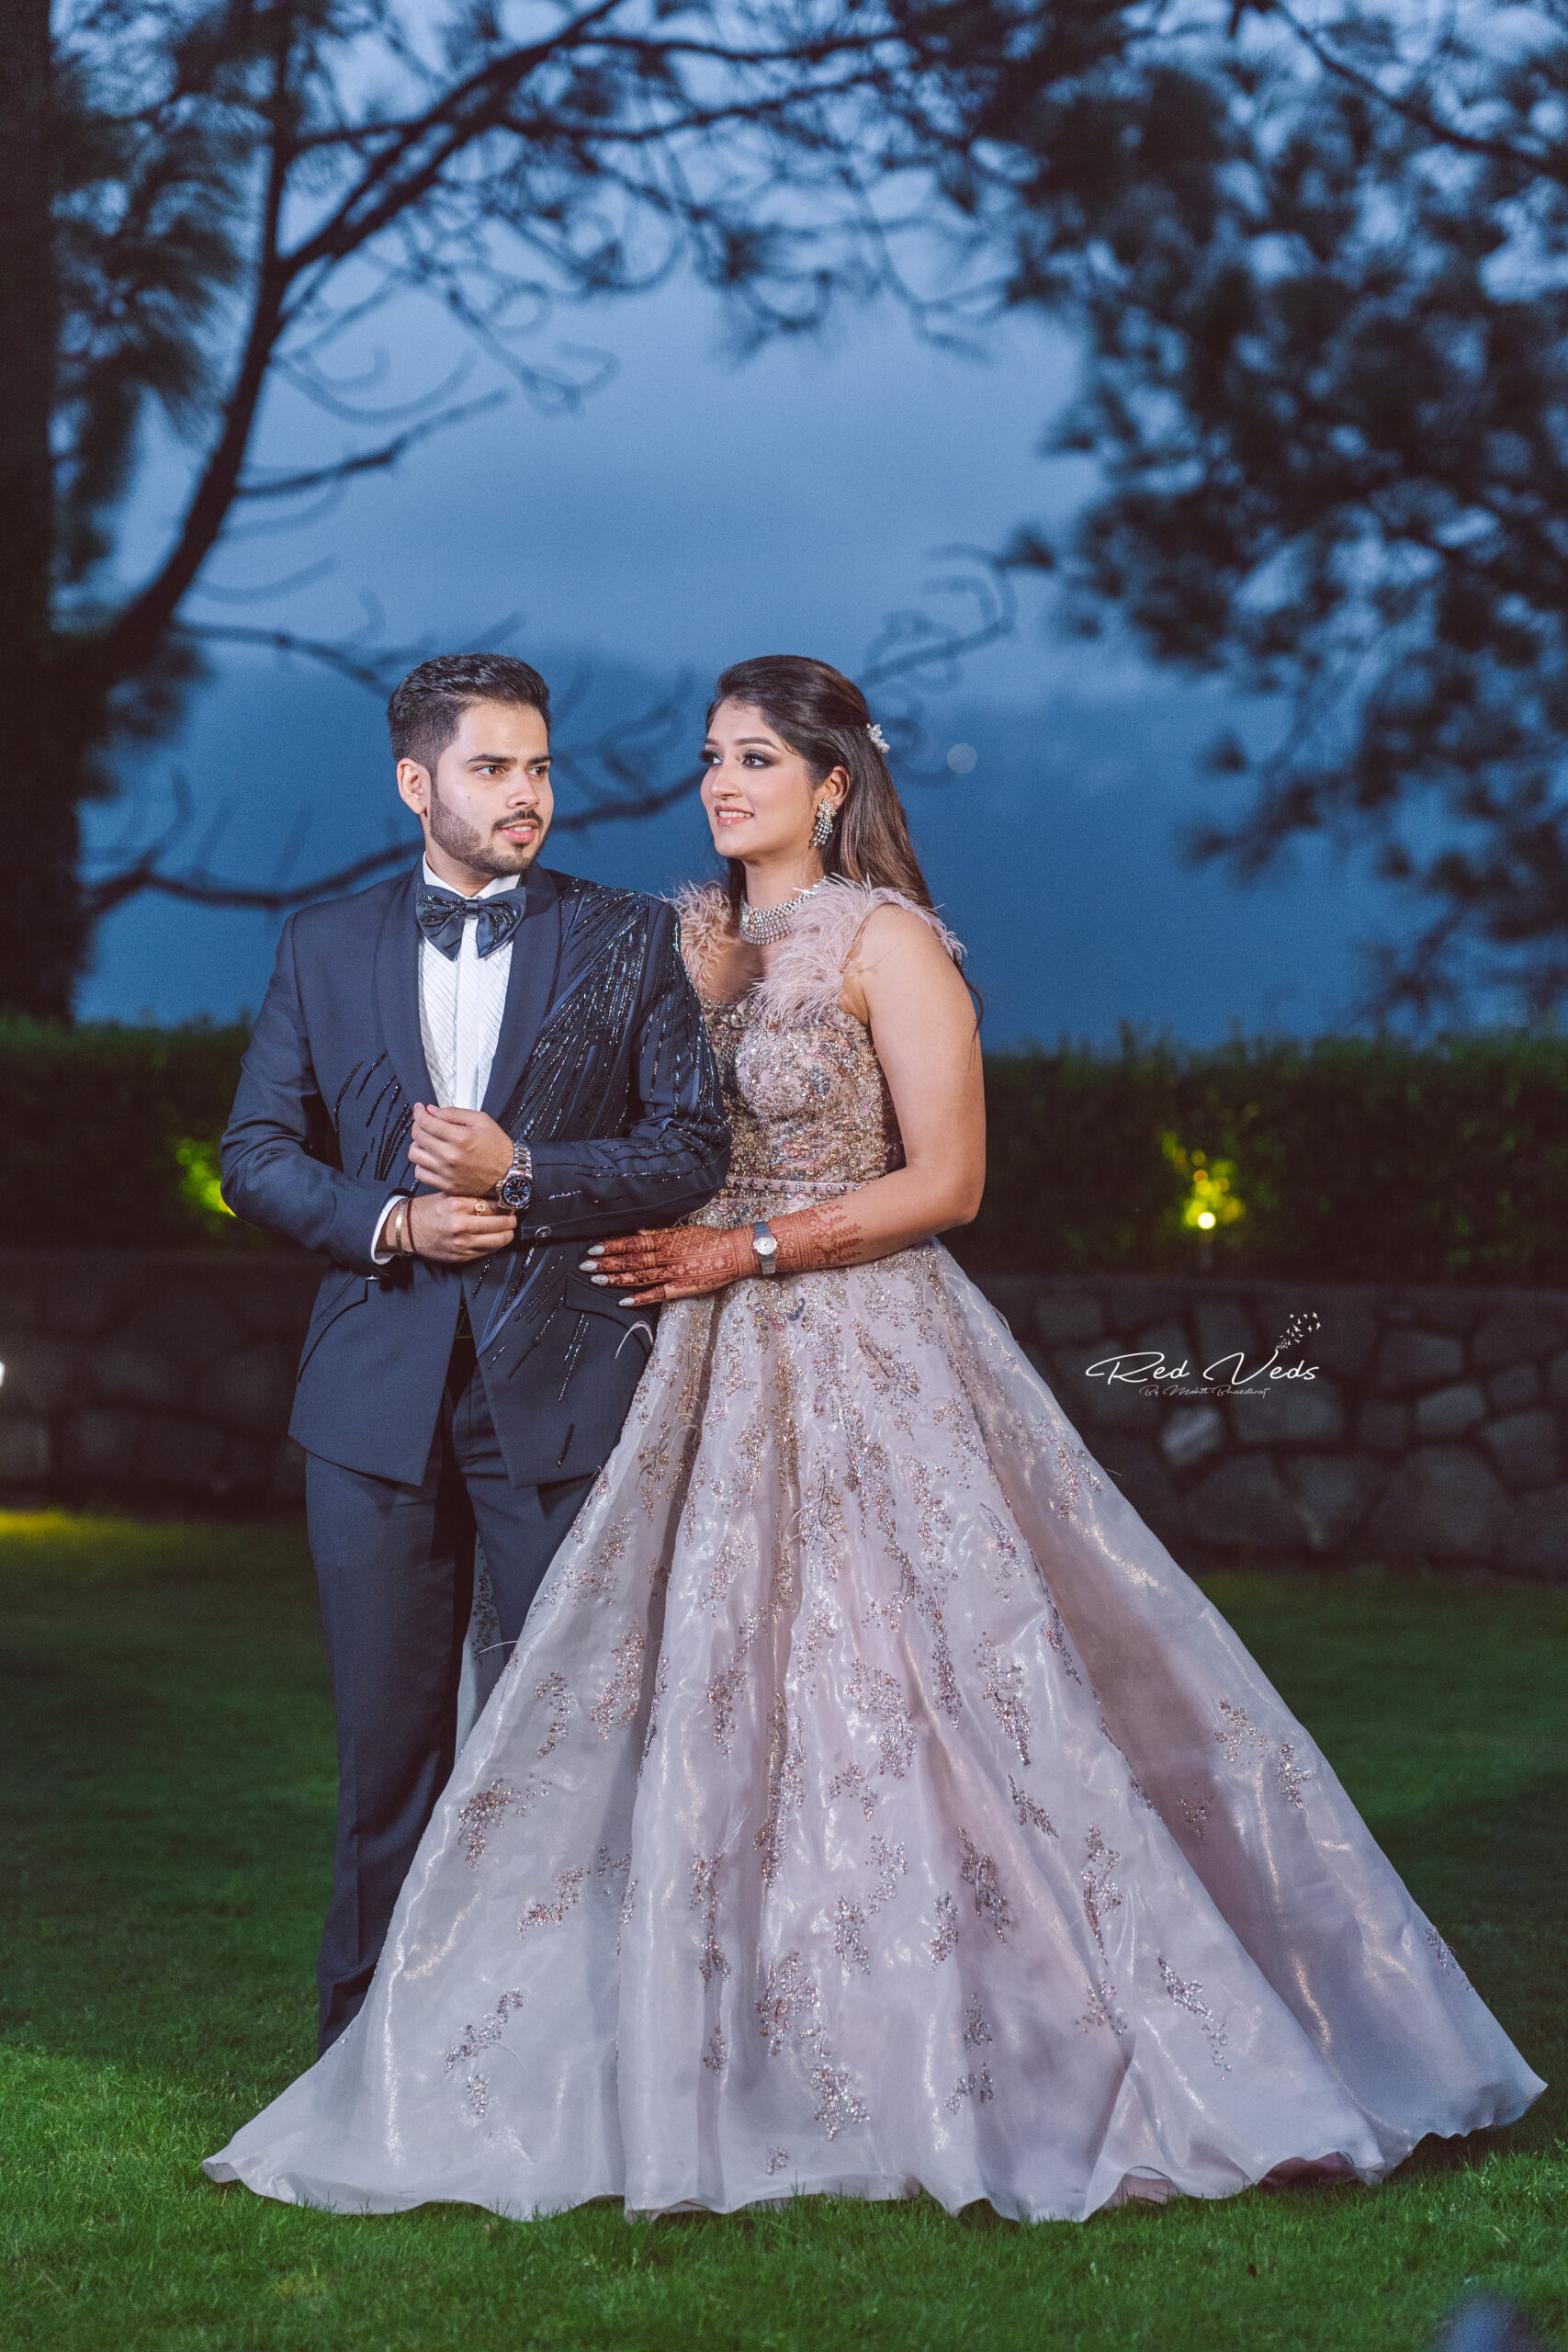 44 Creative Pre Wedding Photoshoot Ideas to Capture Your Day